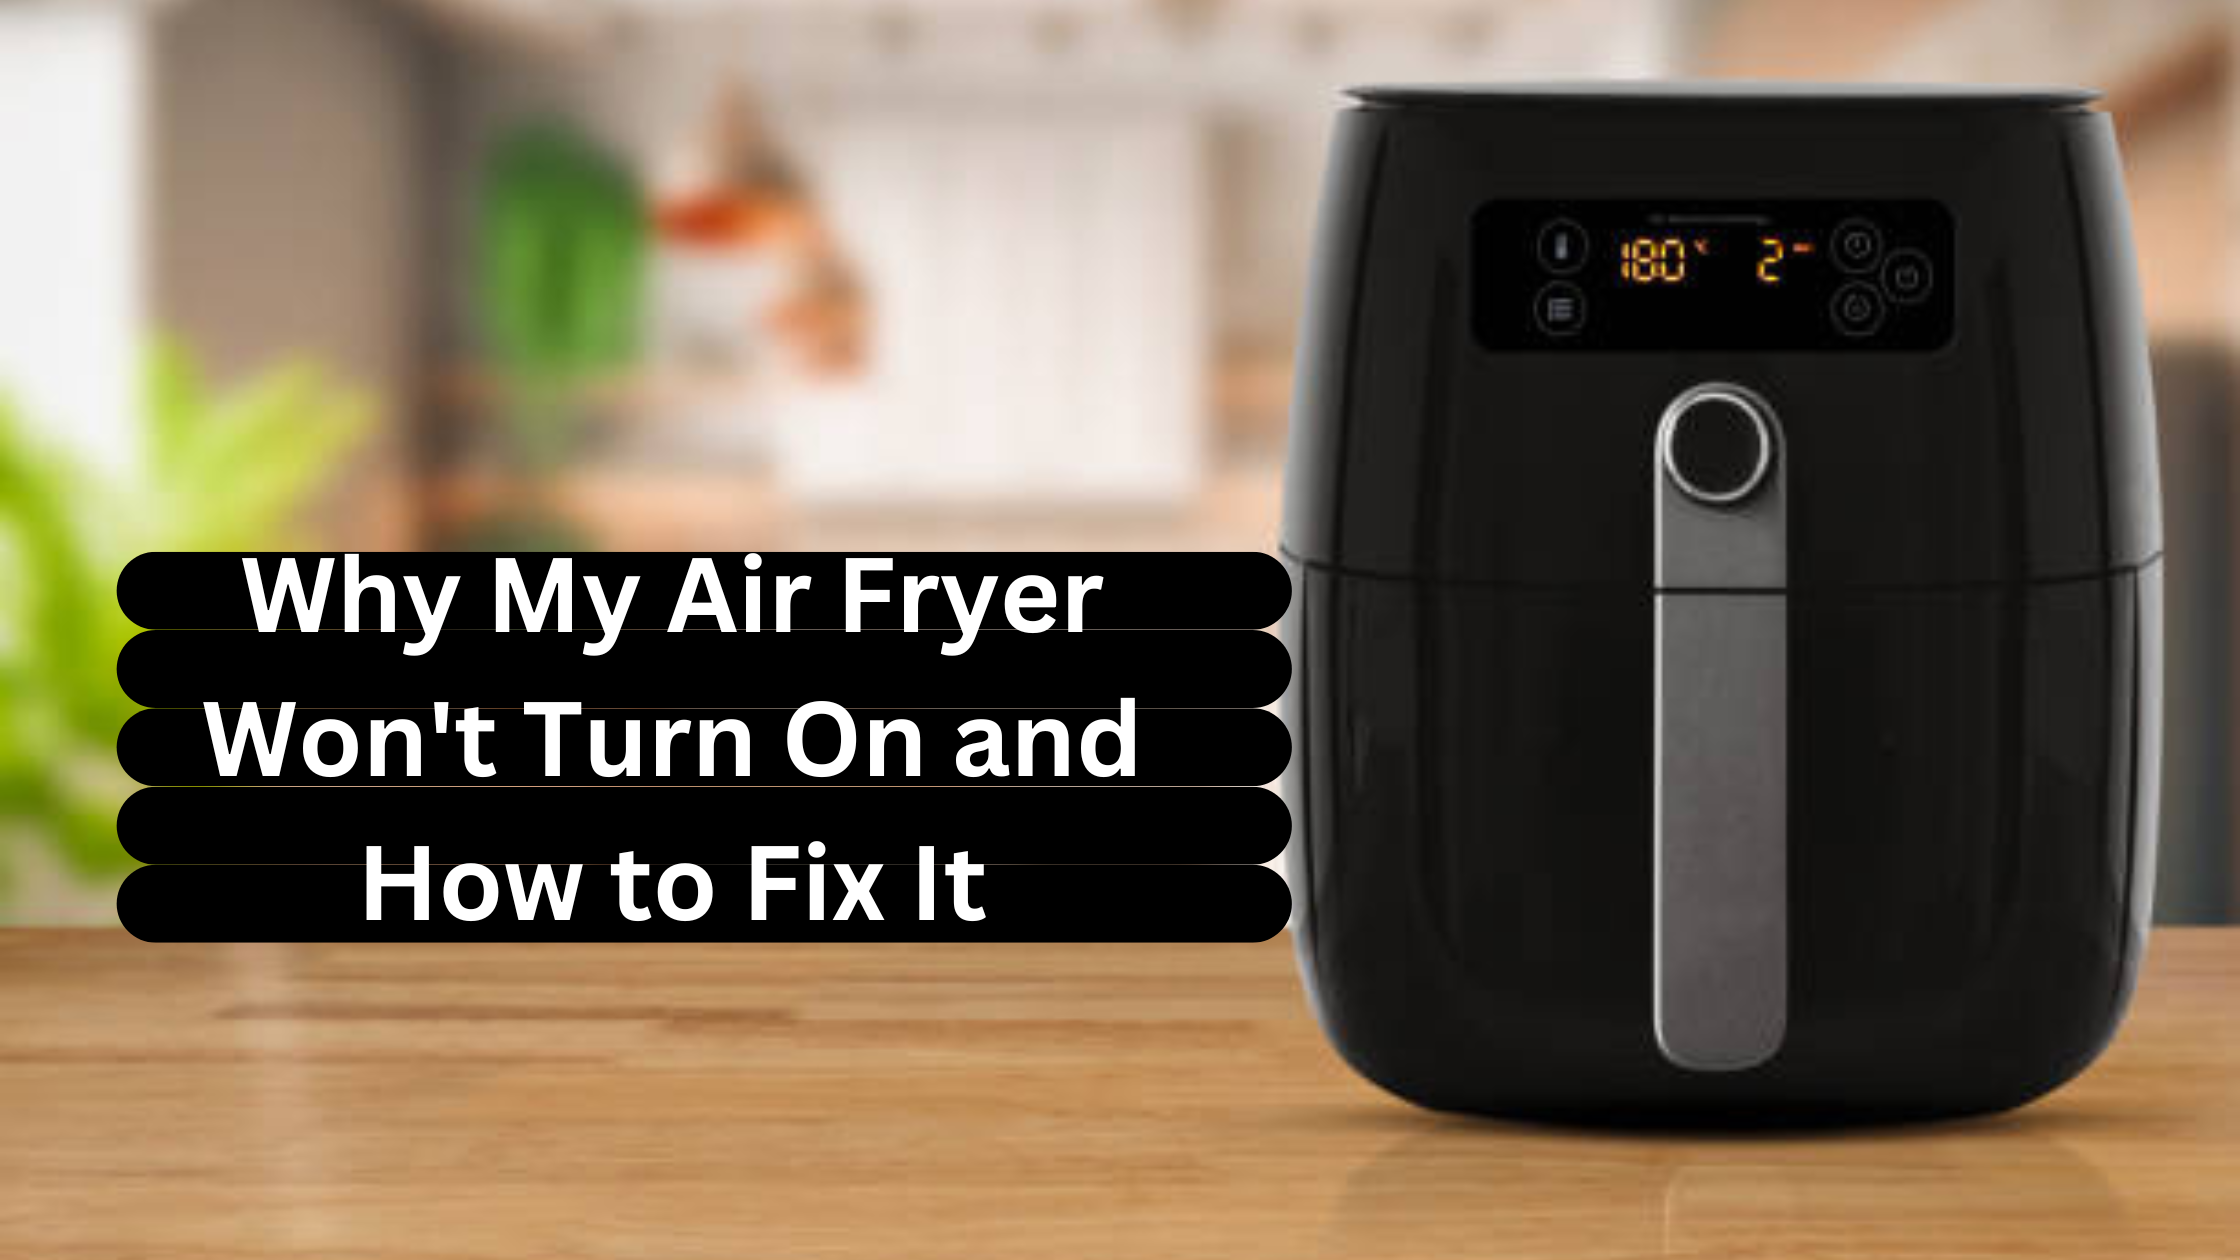 Why My Air Fryer Won't Turn On and How to Fix It